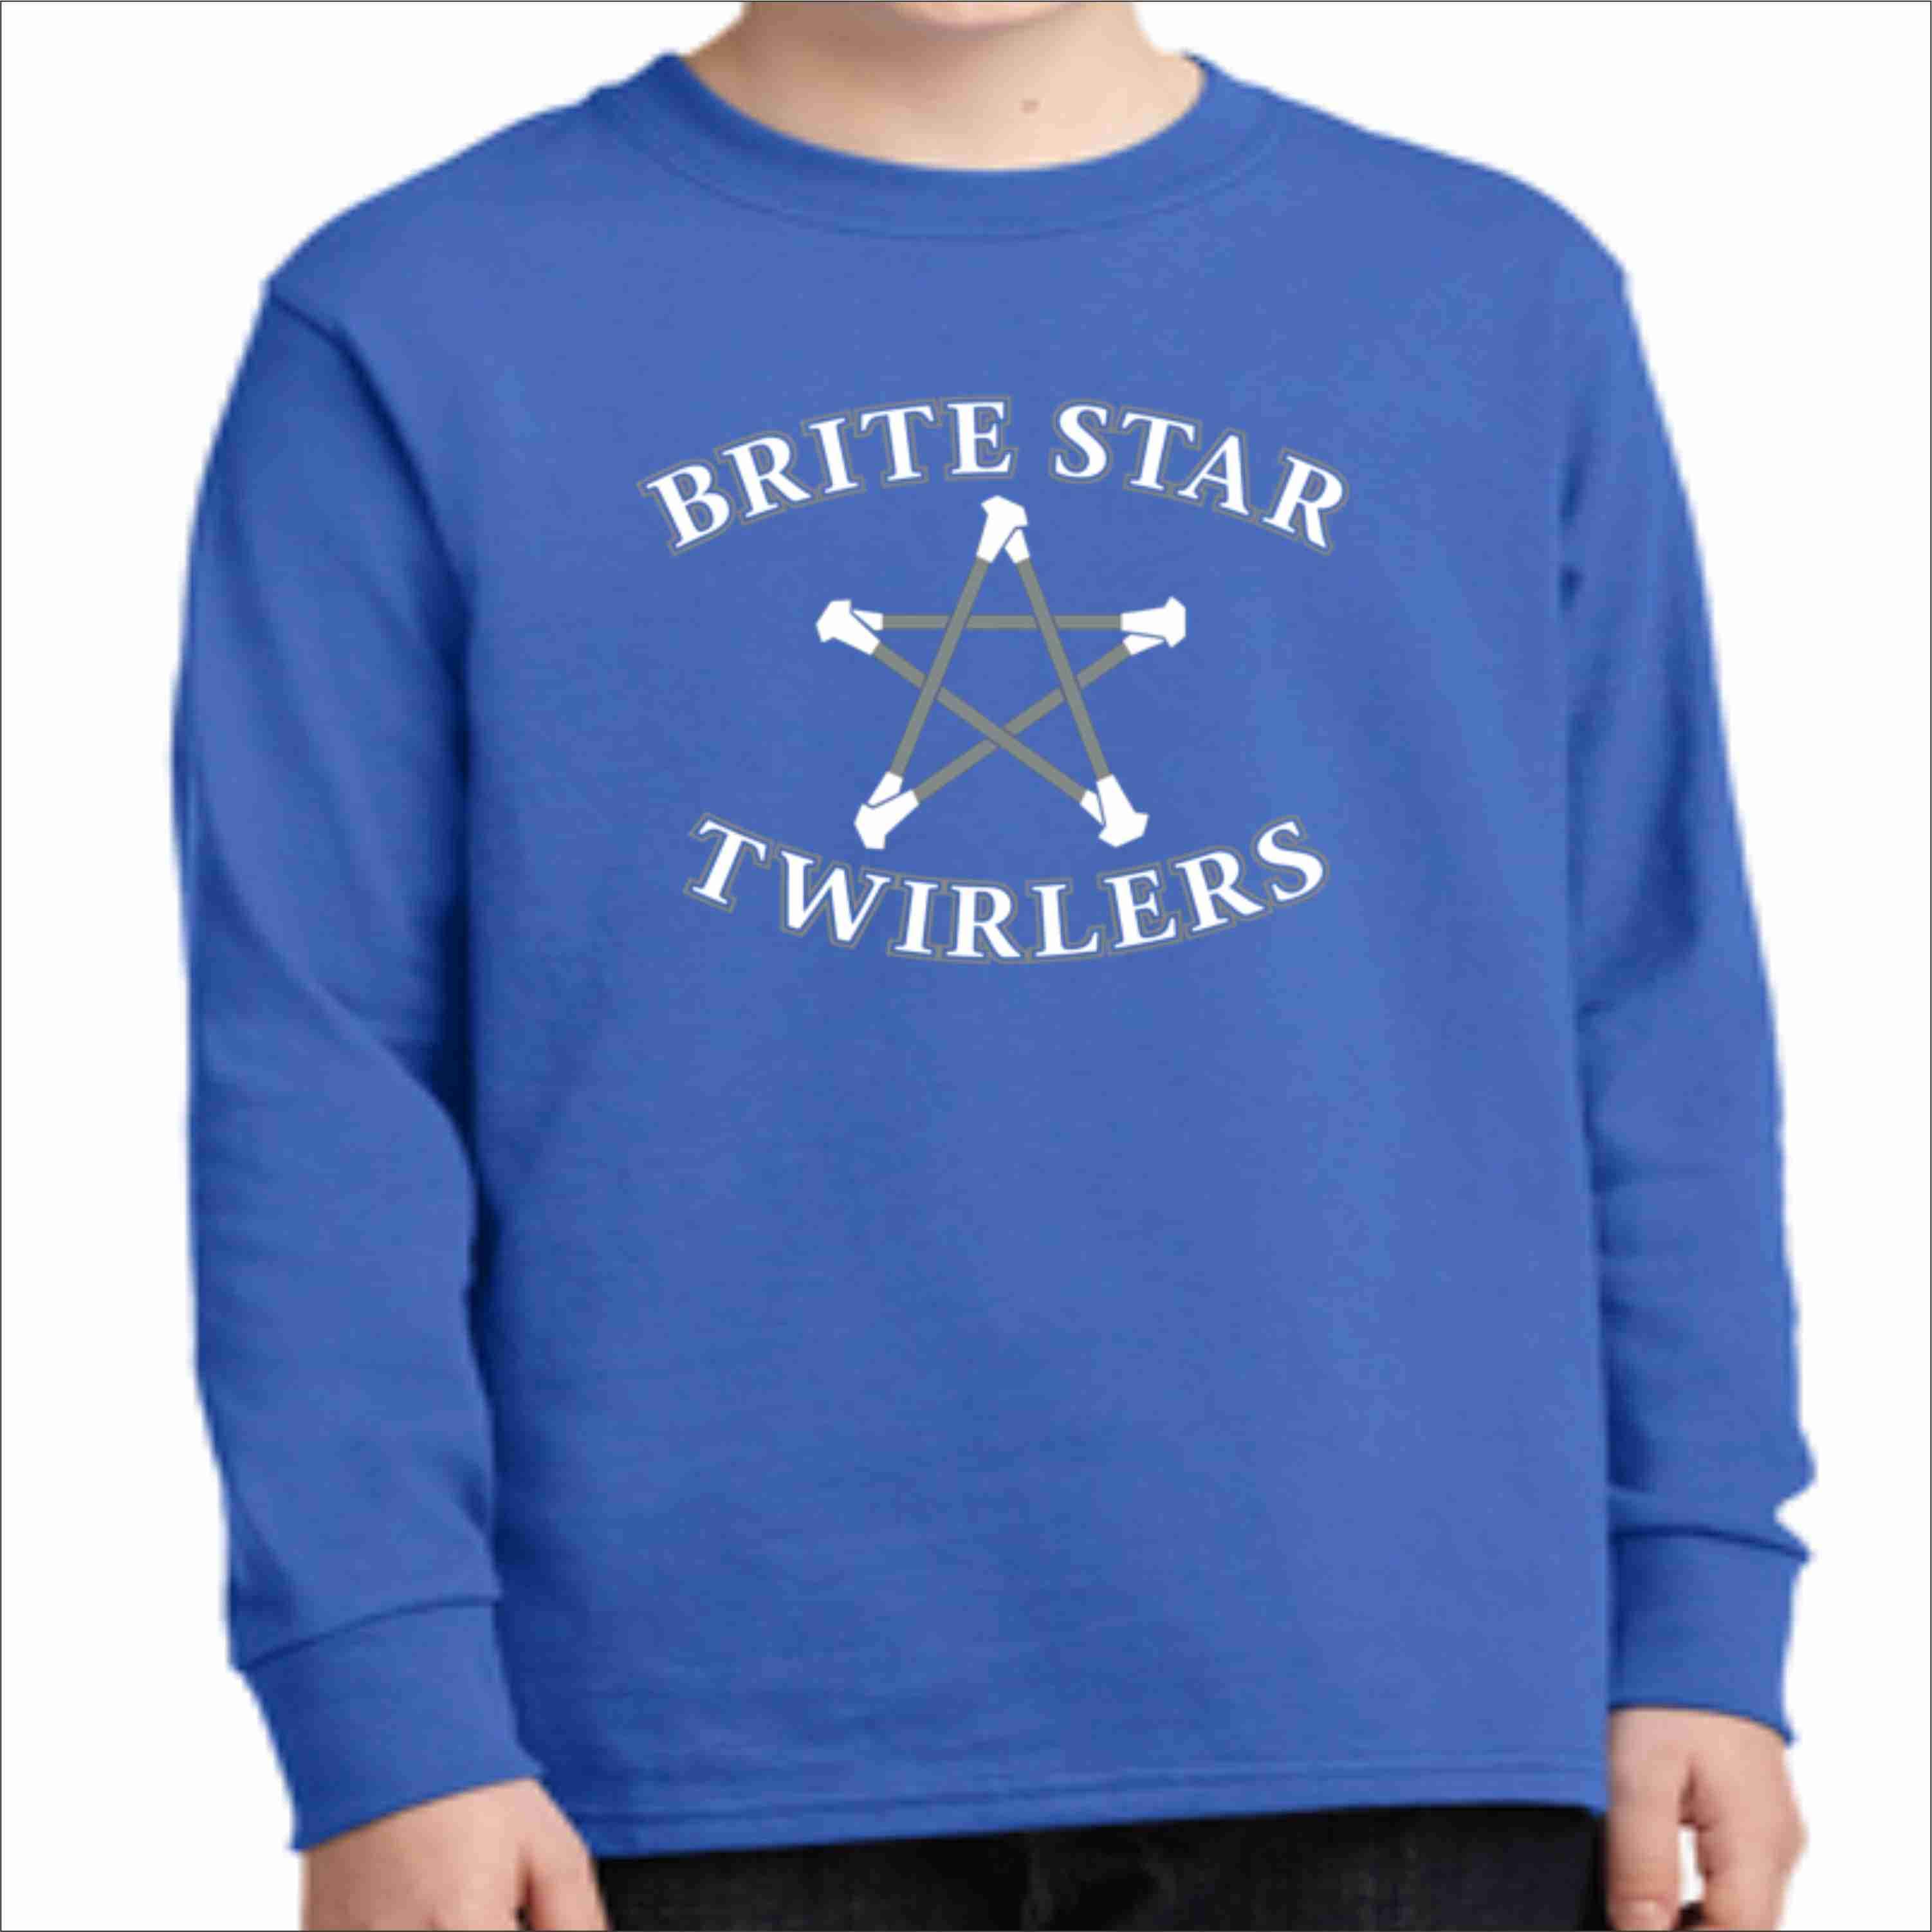 Brite Star Twirlers- Youth Short Long Sleeve Crew Neck Screen Print Long Sleeve Crew Neck Beckys-Boutique.com Small Blue 